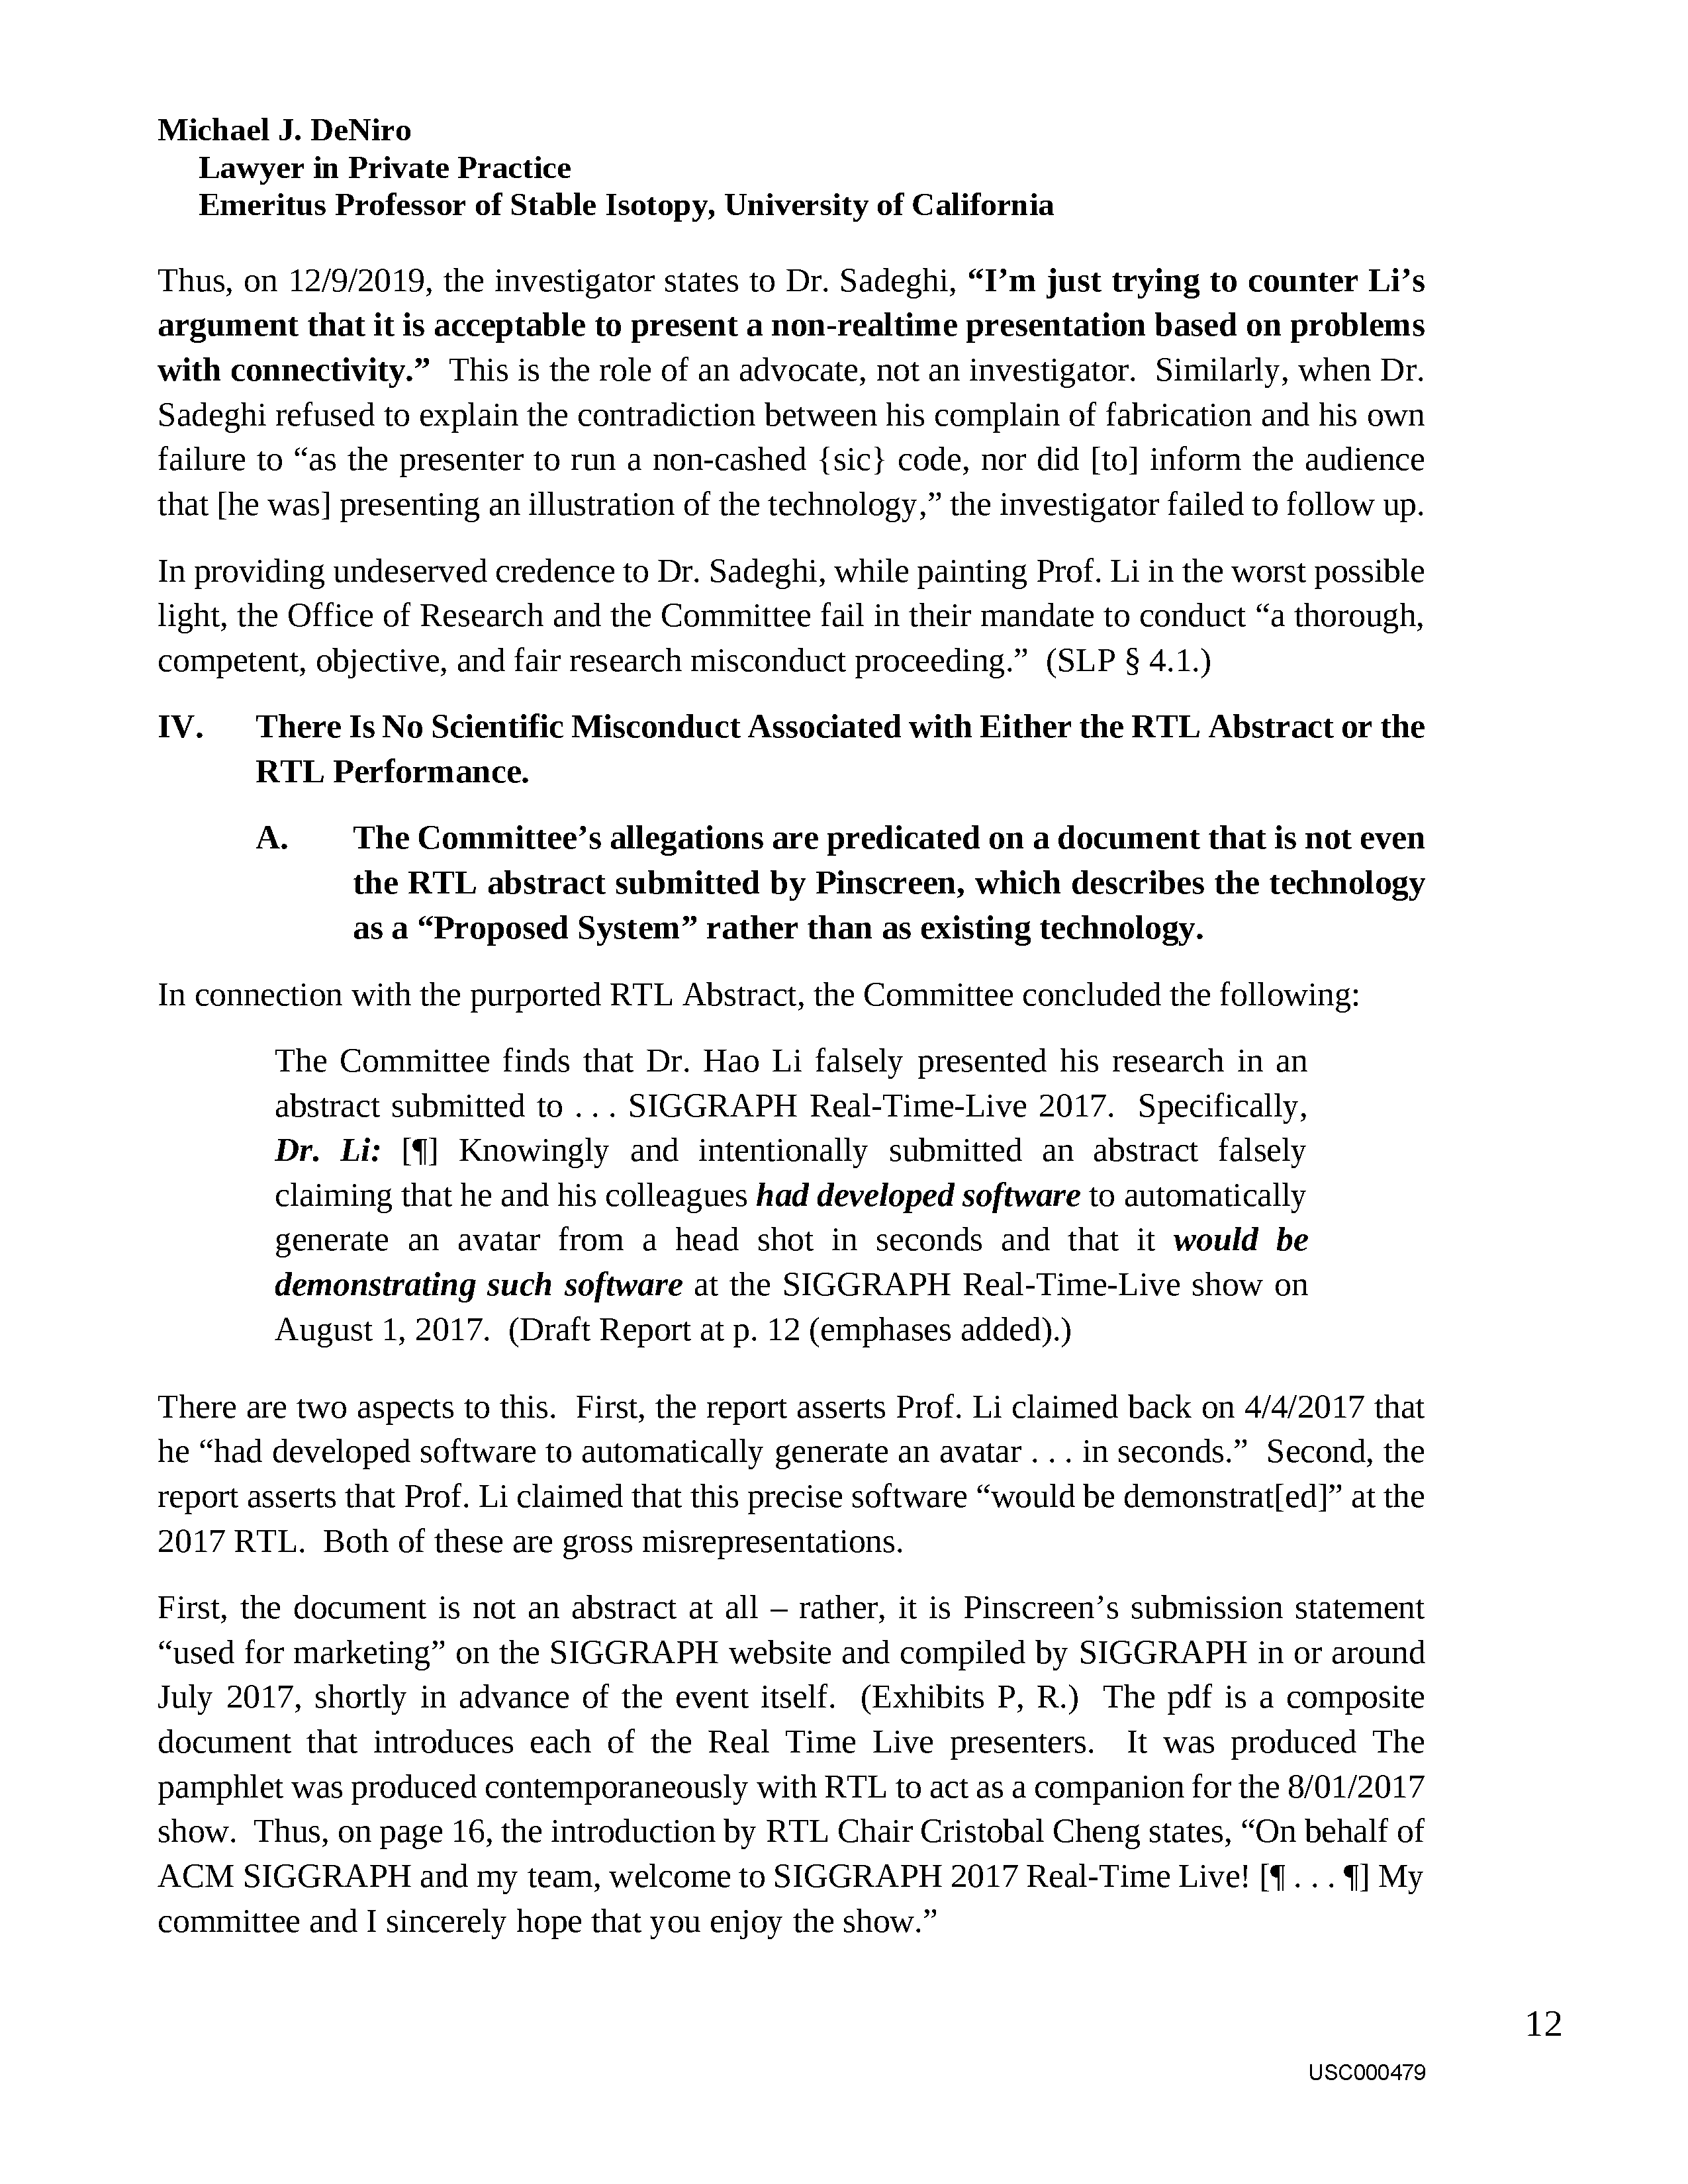 USC's Investigation Report re Hao Li's and Pinscreen's Scientific Misconduct at ACM SIGGRAPH RTL 2017 [Summary] Page 103